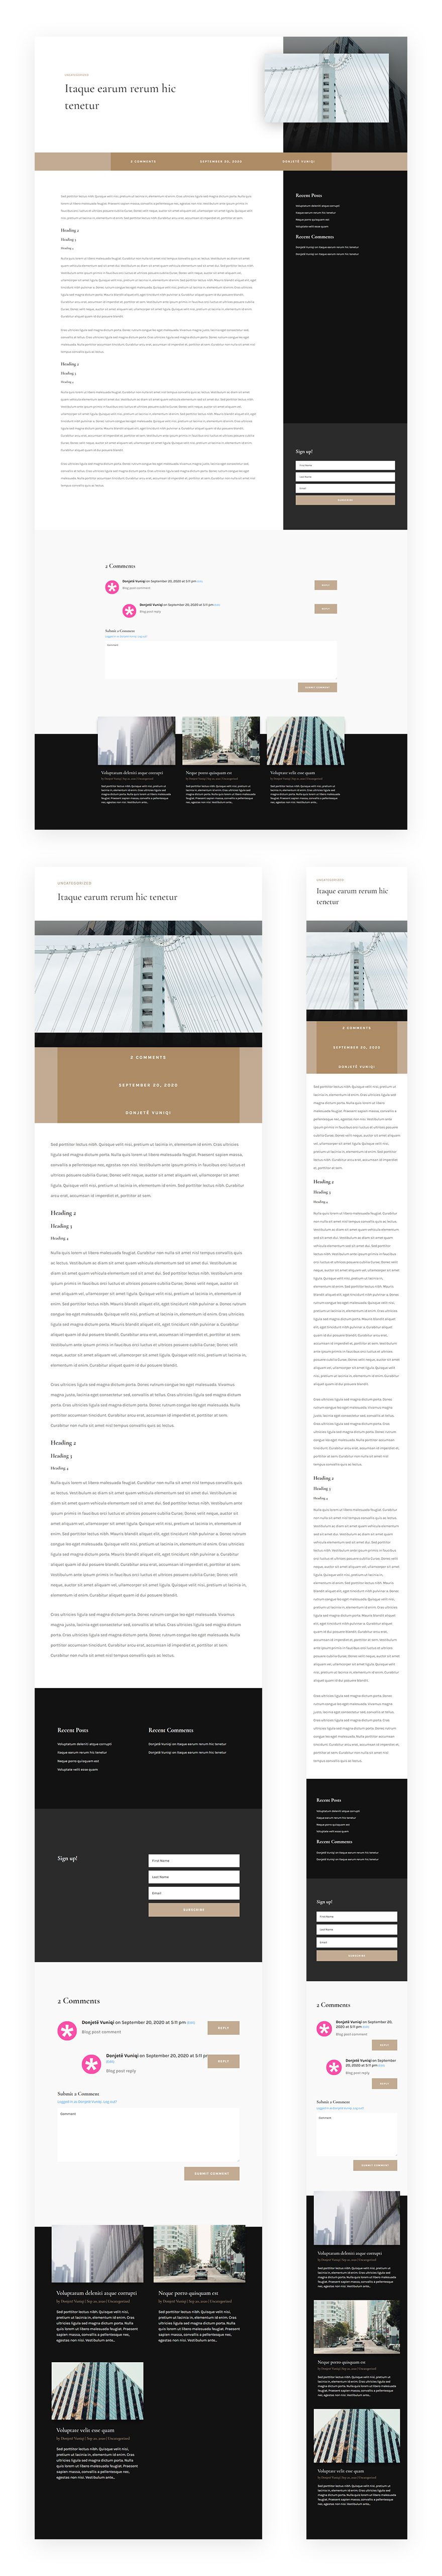 architecture firm blog post template